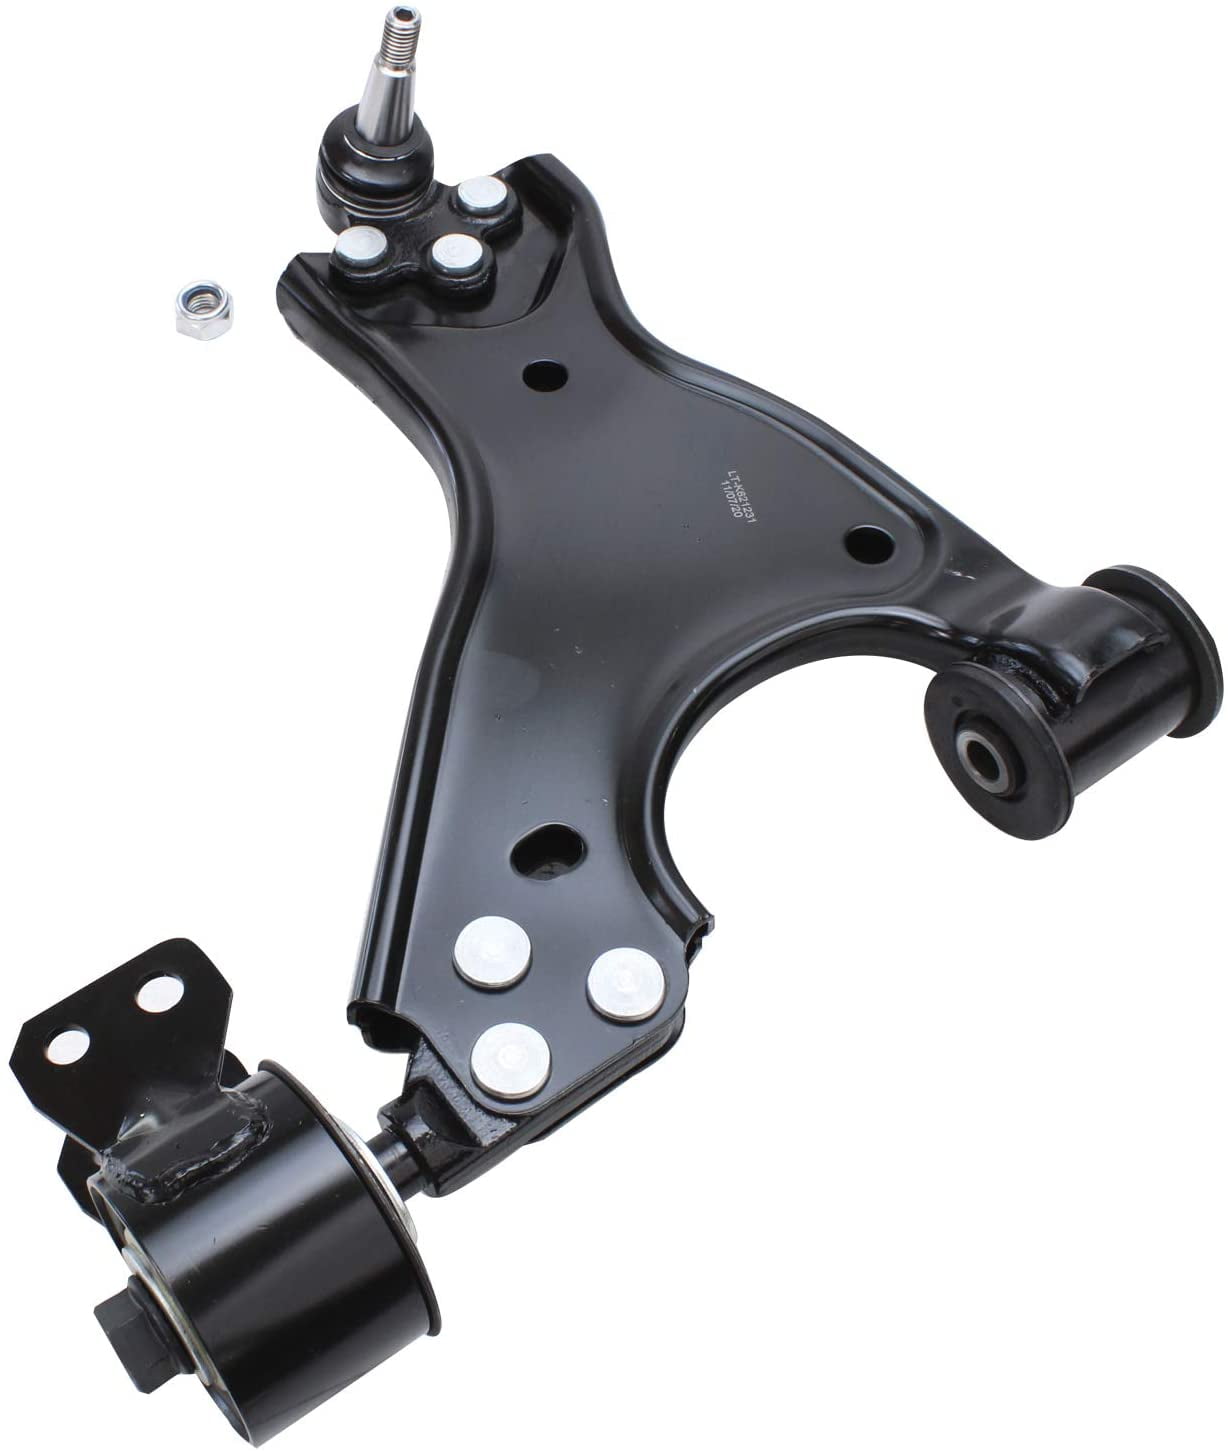 2007-2010 Saturn Outlook Detroit Axle Rear Upper Forward & Rearward Control Arm Kit for 2008-2015 Buick Enclave - - 2007-2015 GMC Acadia - 2009-2015 Chevy Traverse